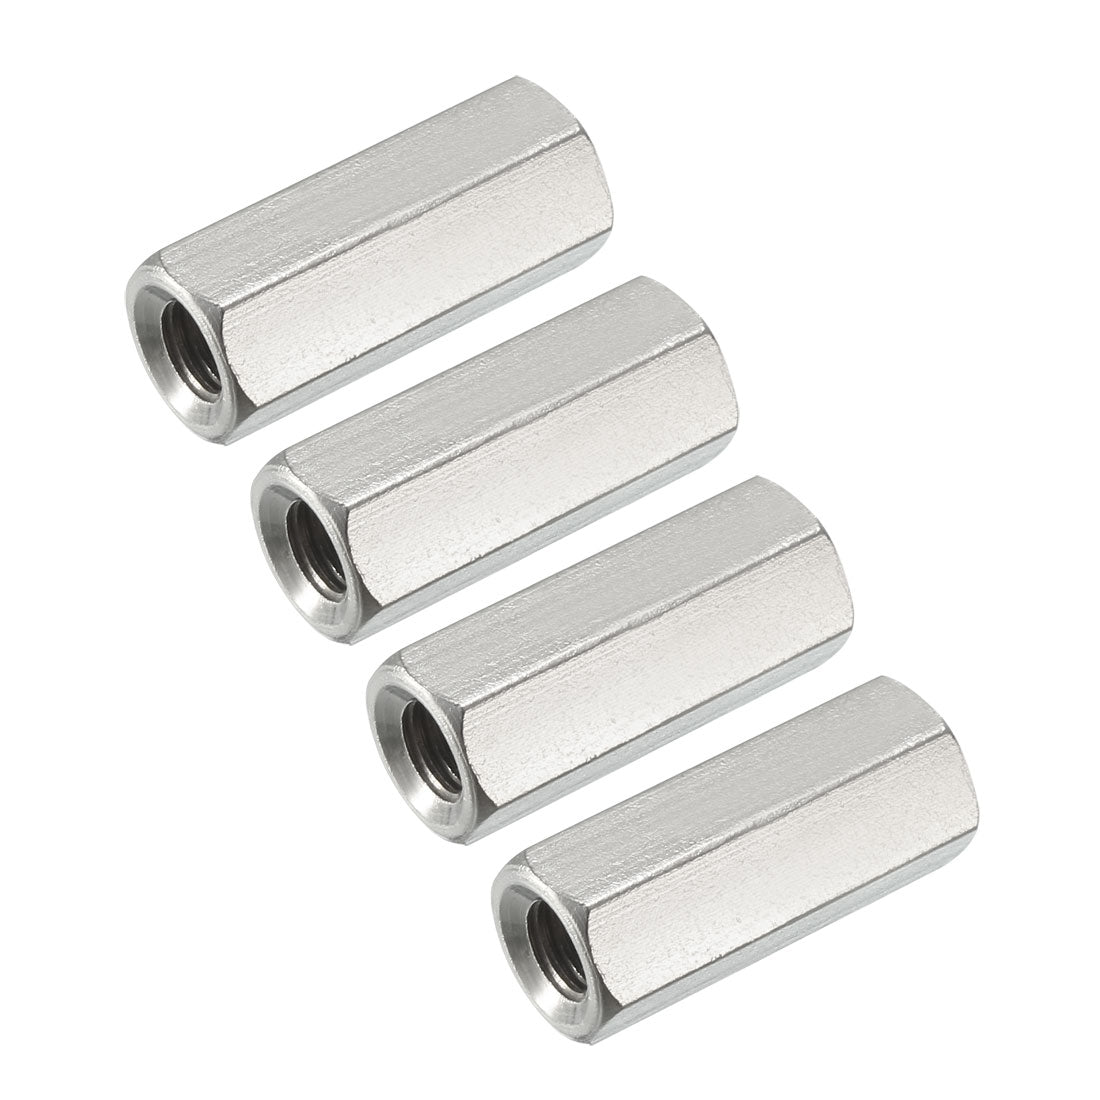 uxcell Uxcell M6 X 1-Pitch 25mm Length 304 Stainless Steel Metric Hex Coupling Nut, 4Pcs